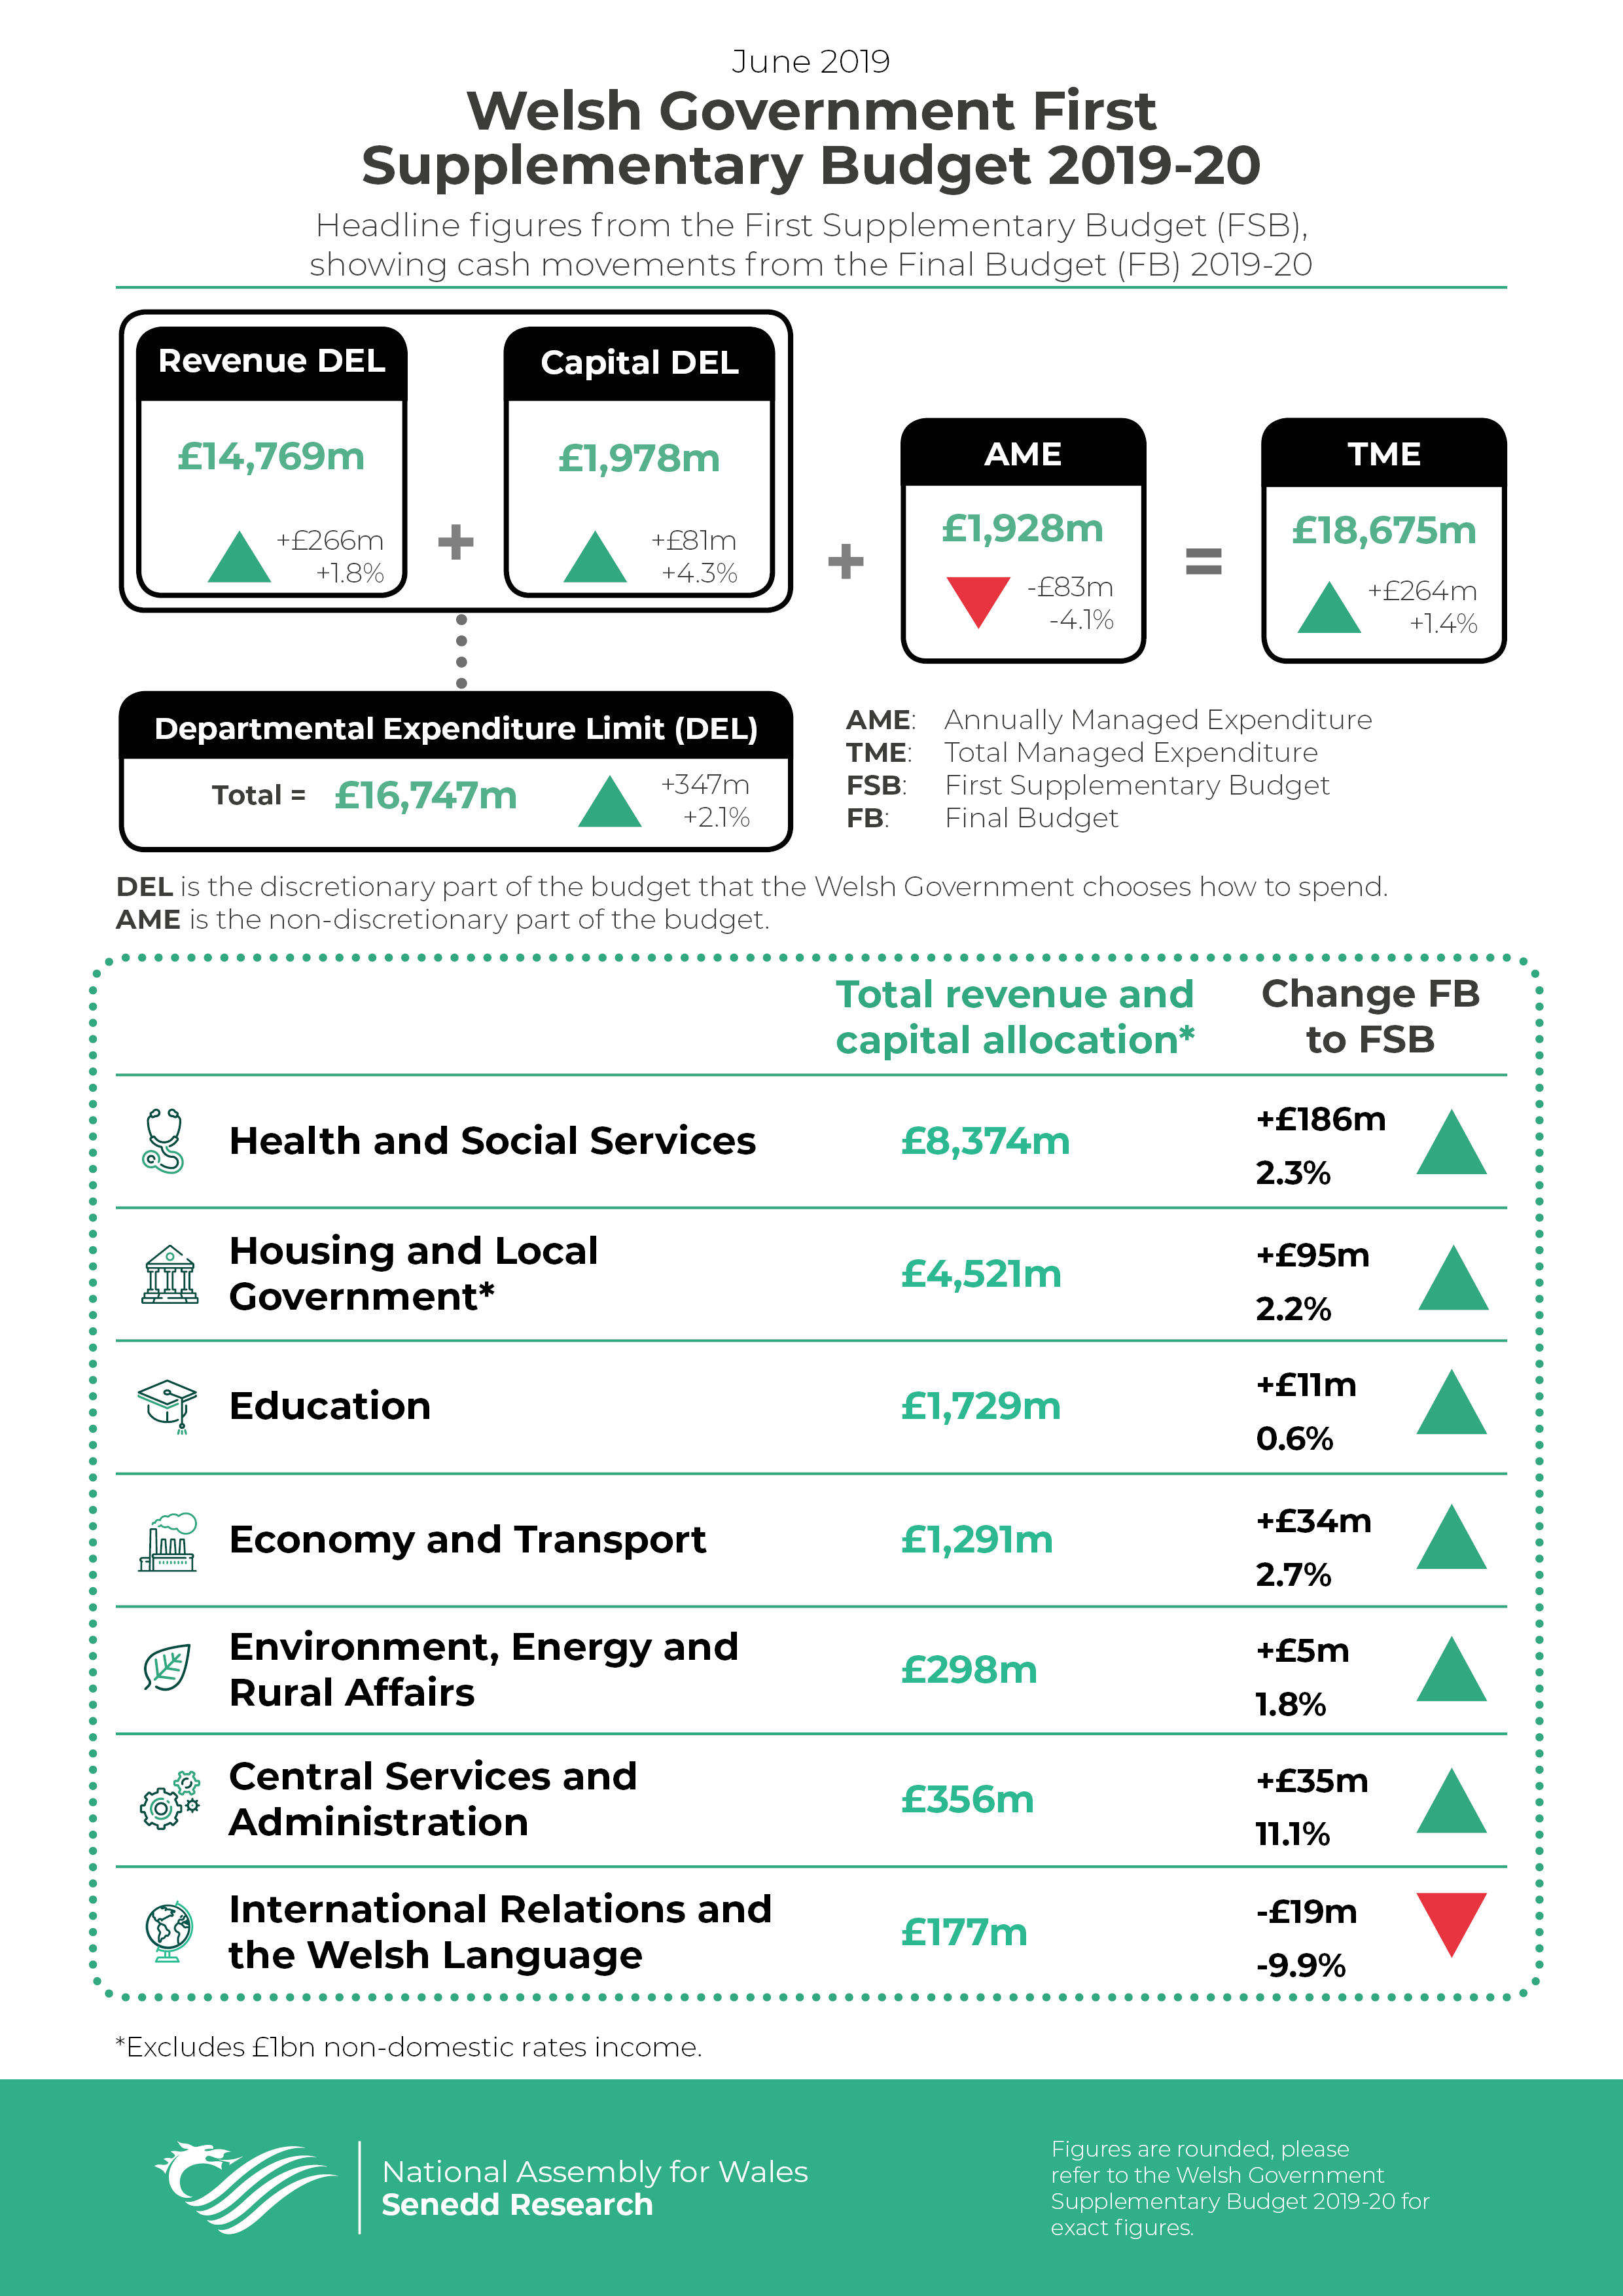 An infographic that shows the changes from the Welsh Government’s Final budget 2019-20 to the First Supplementary Budget 2019-20. 